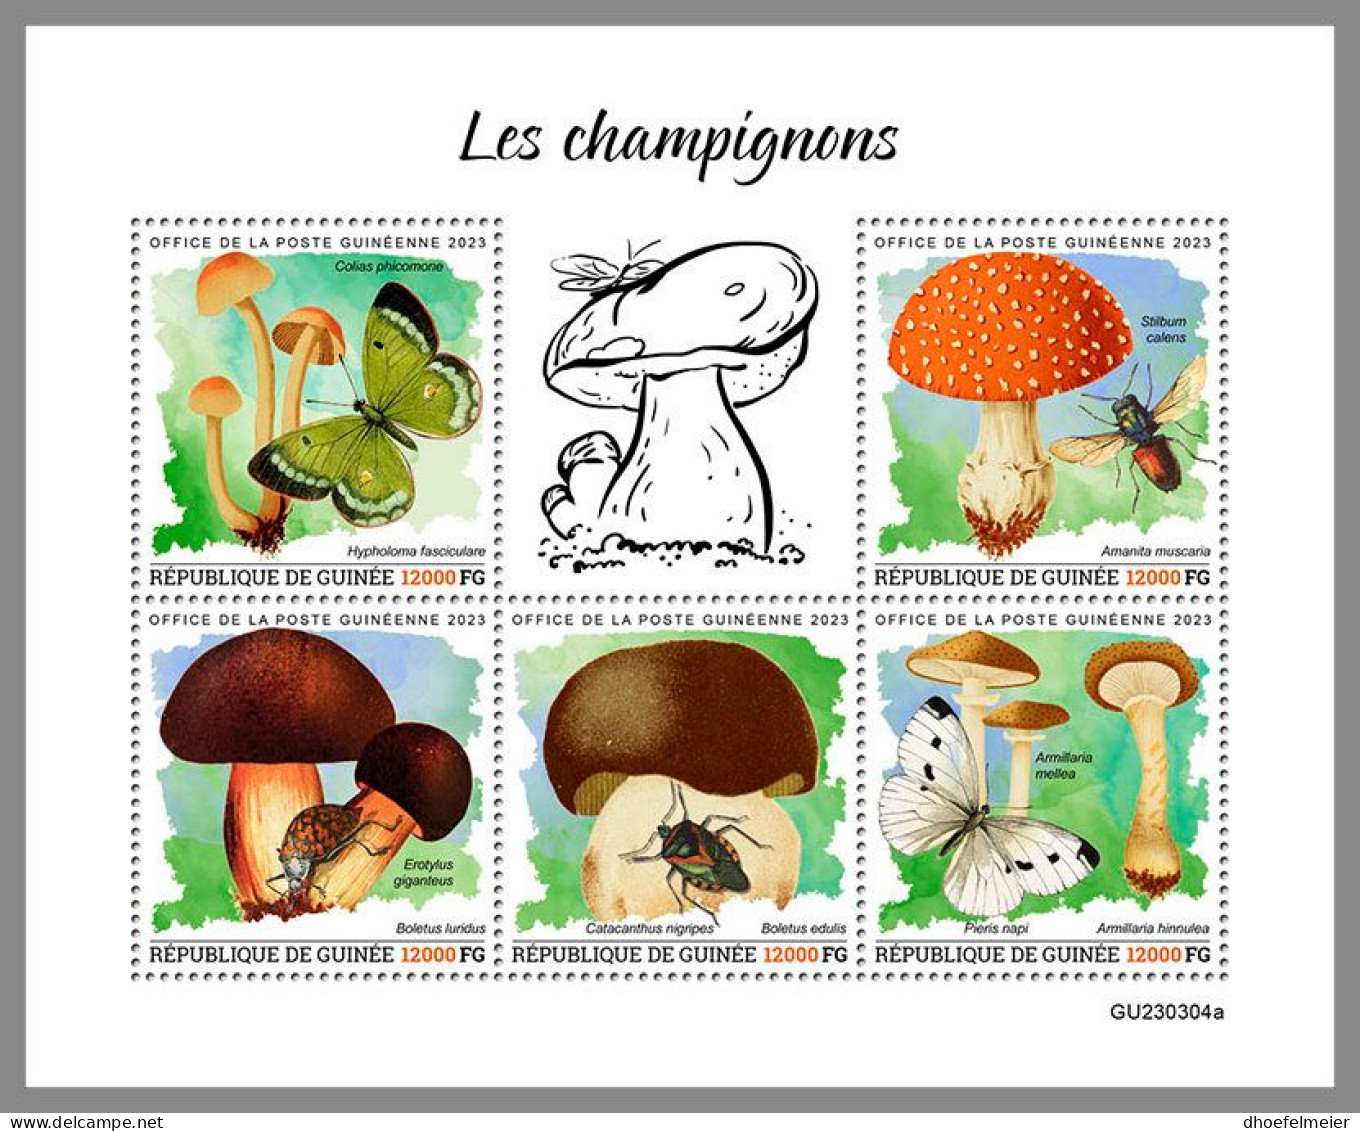 GUINEA REP. 2023 MNH Mushrooms Pilze M/S – OFFICIAL ISSUE – DHQ2417 - Champignons